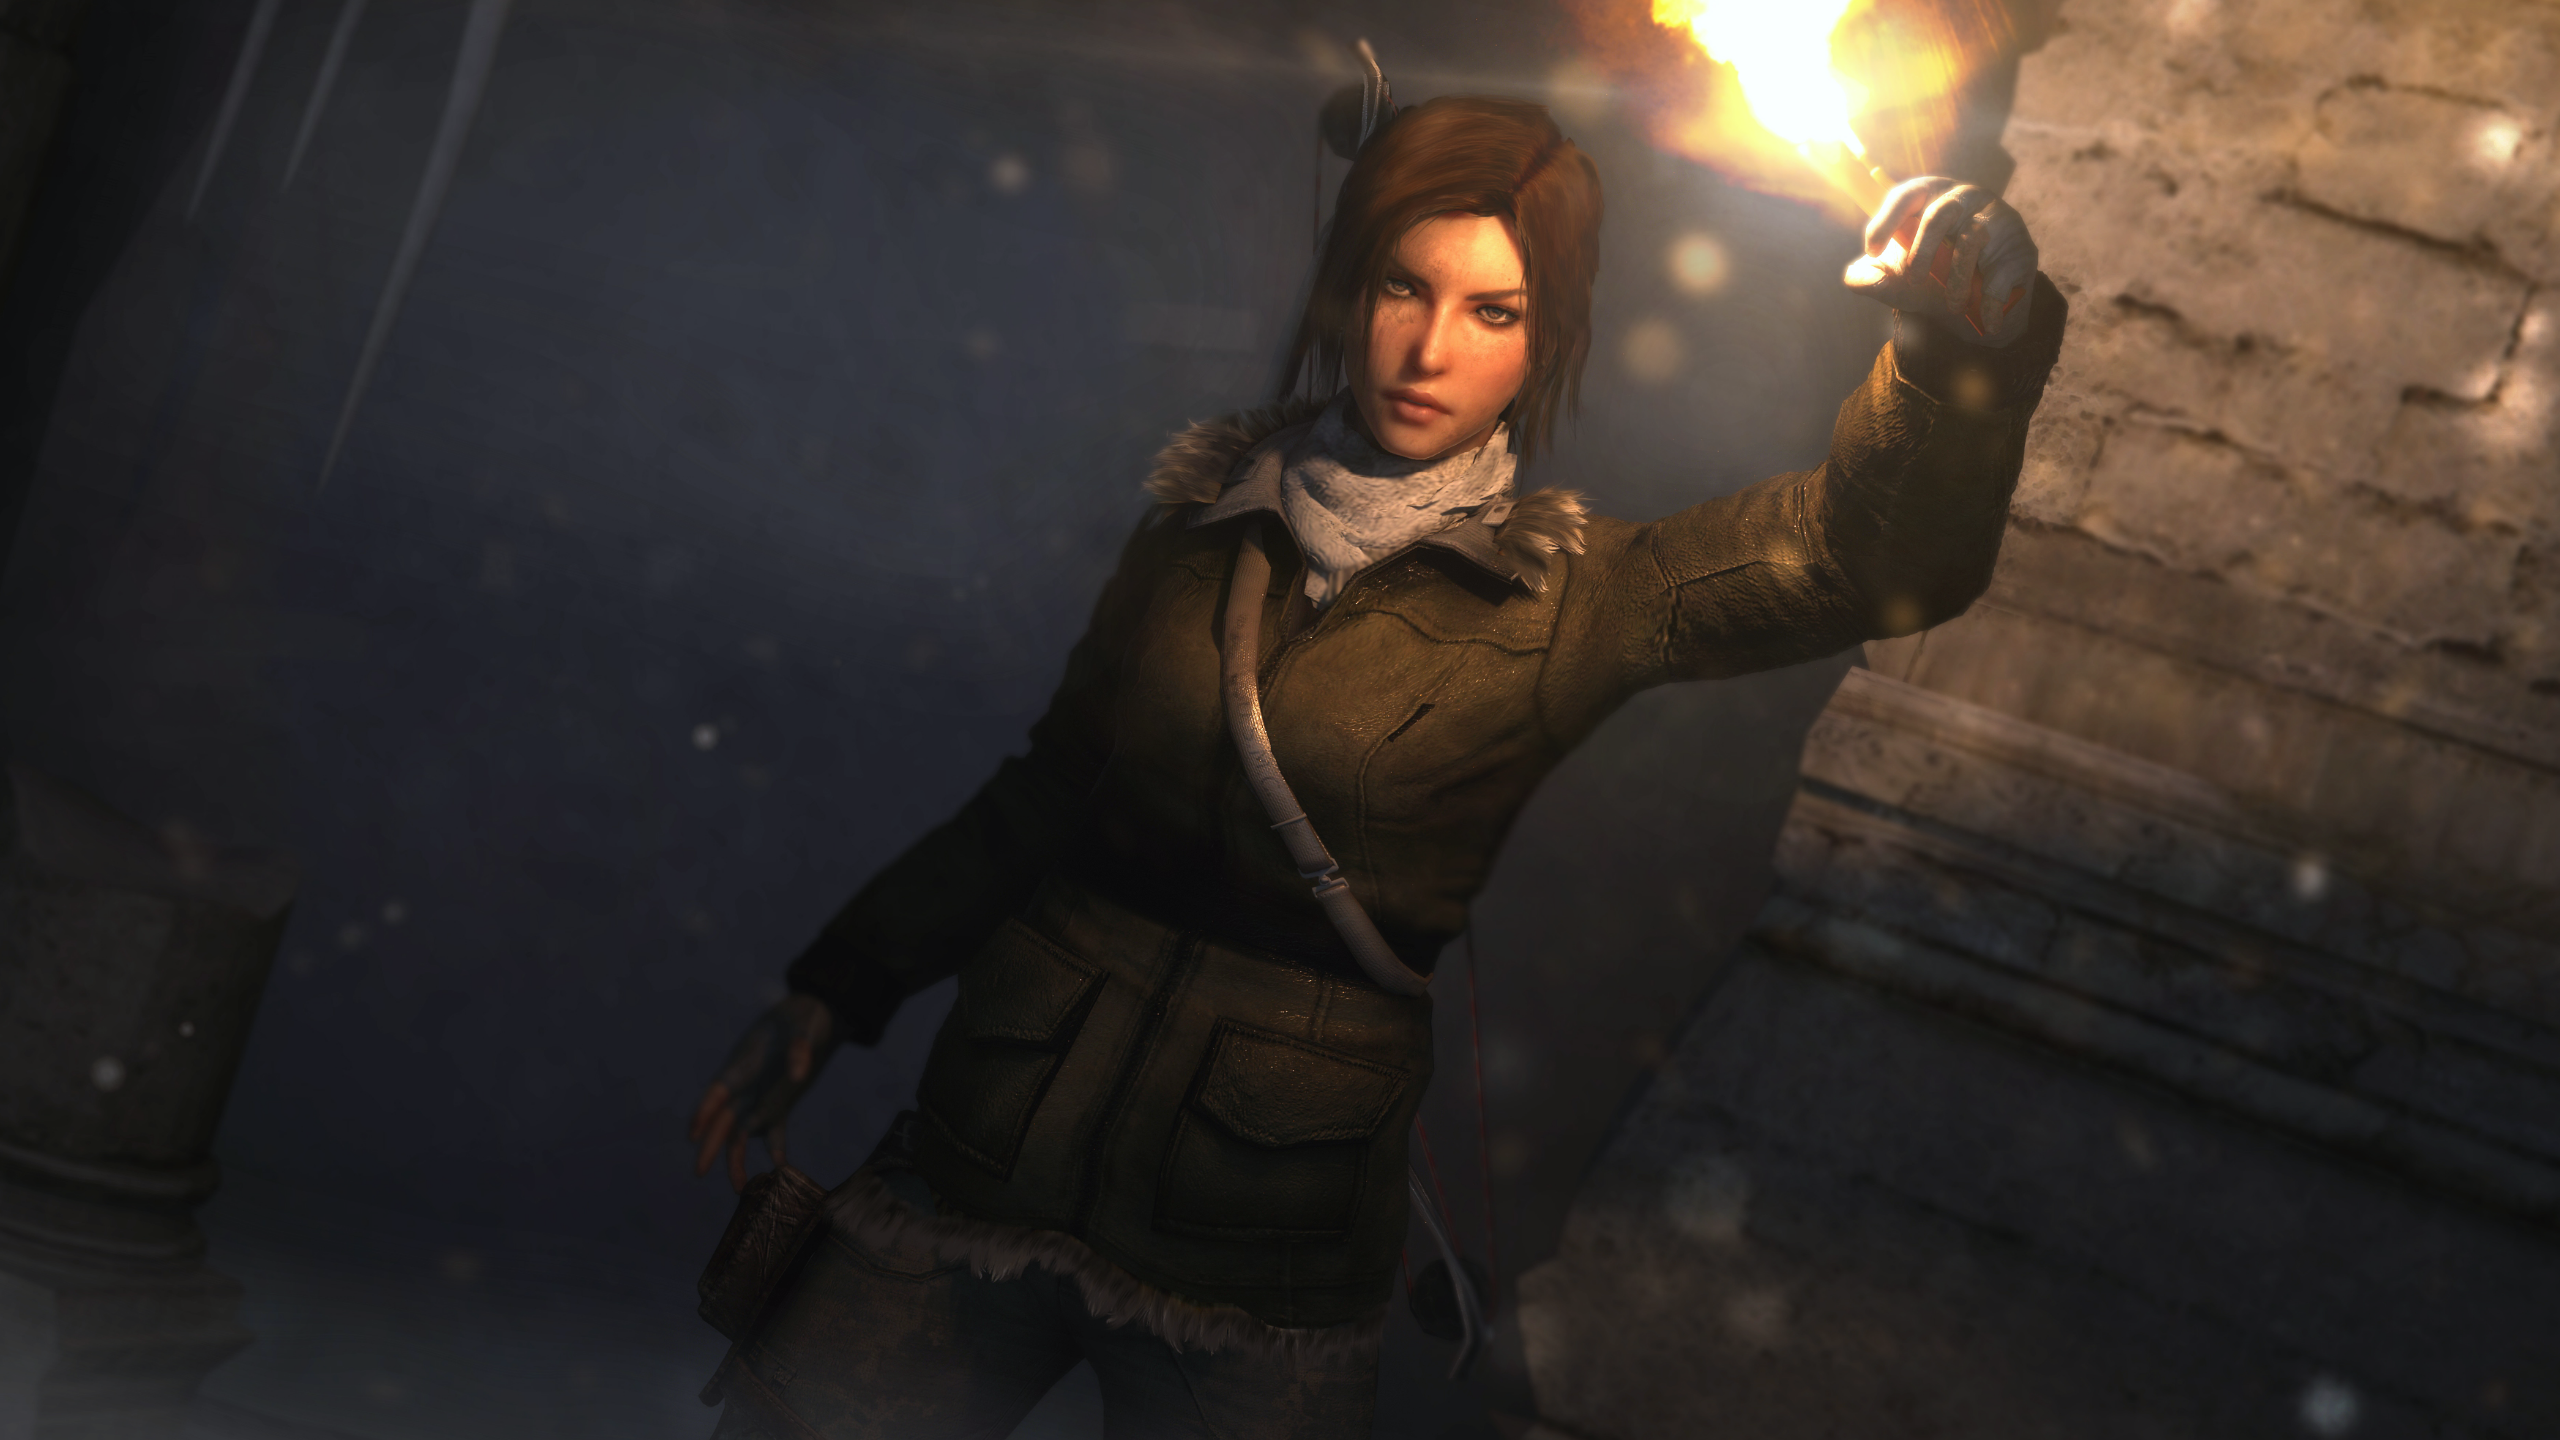 General 2560x1440 PC gaming Rise of the Tomb Raider Tomb Raider Lara Croft (Tomb Raider) video game girls video game characters video games